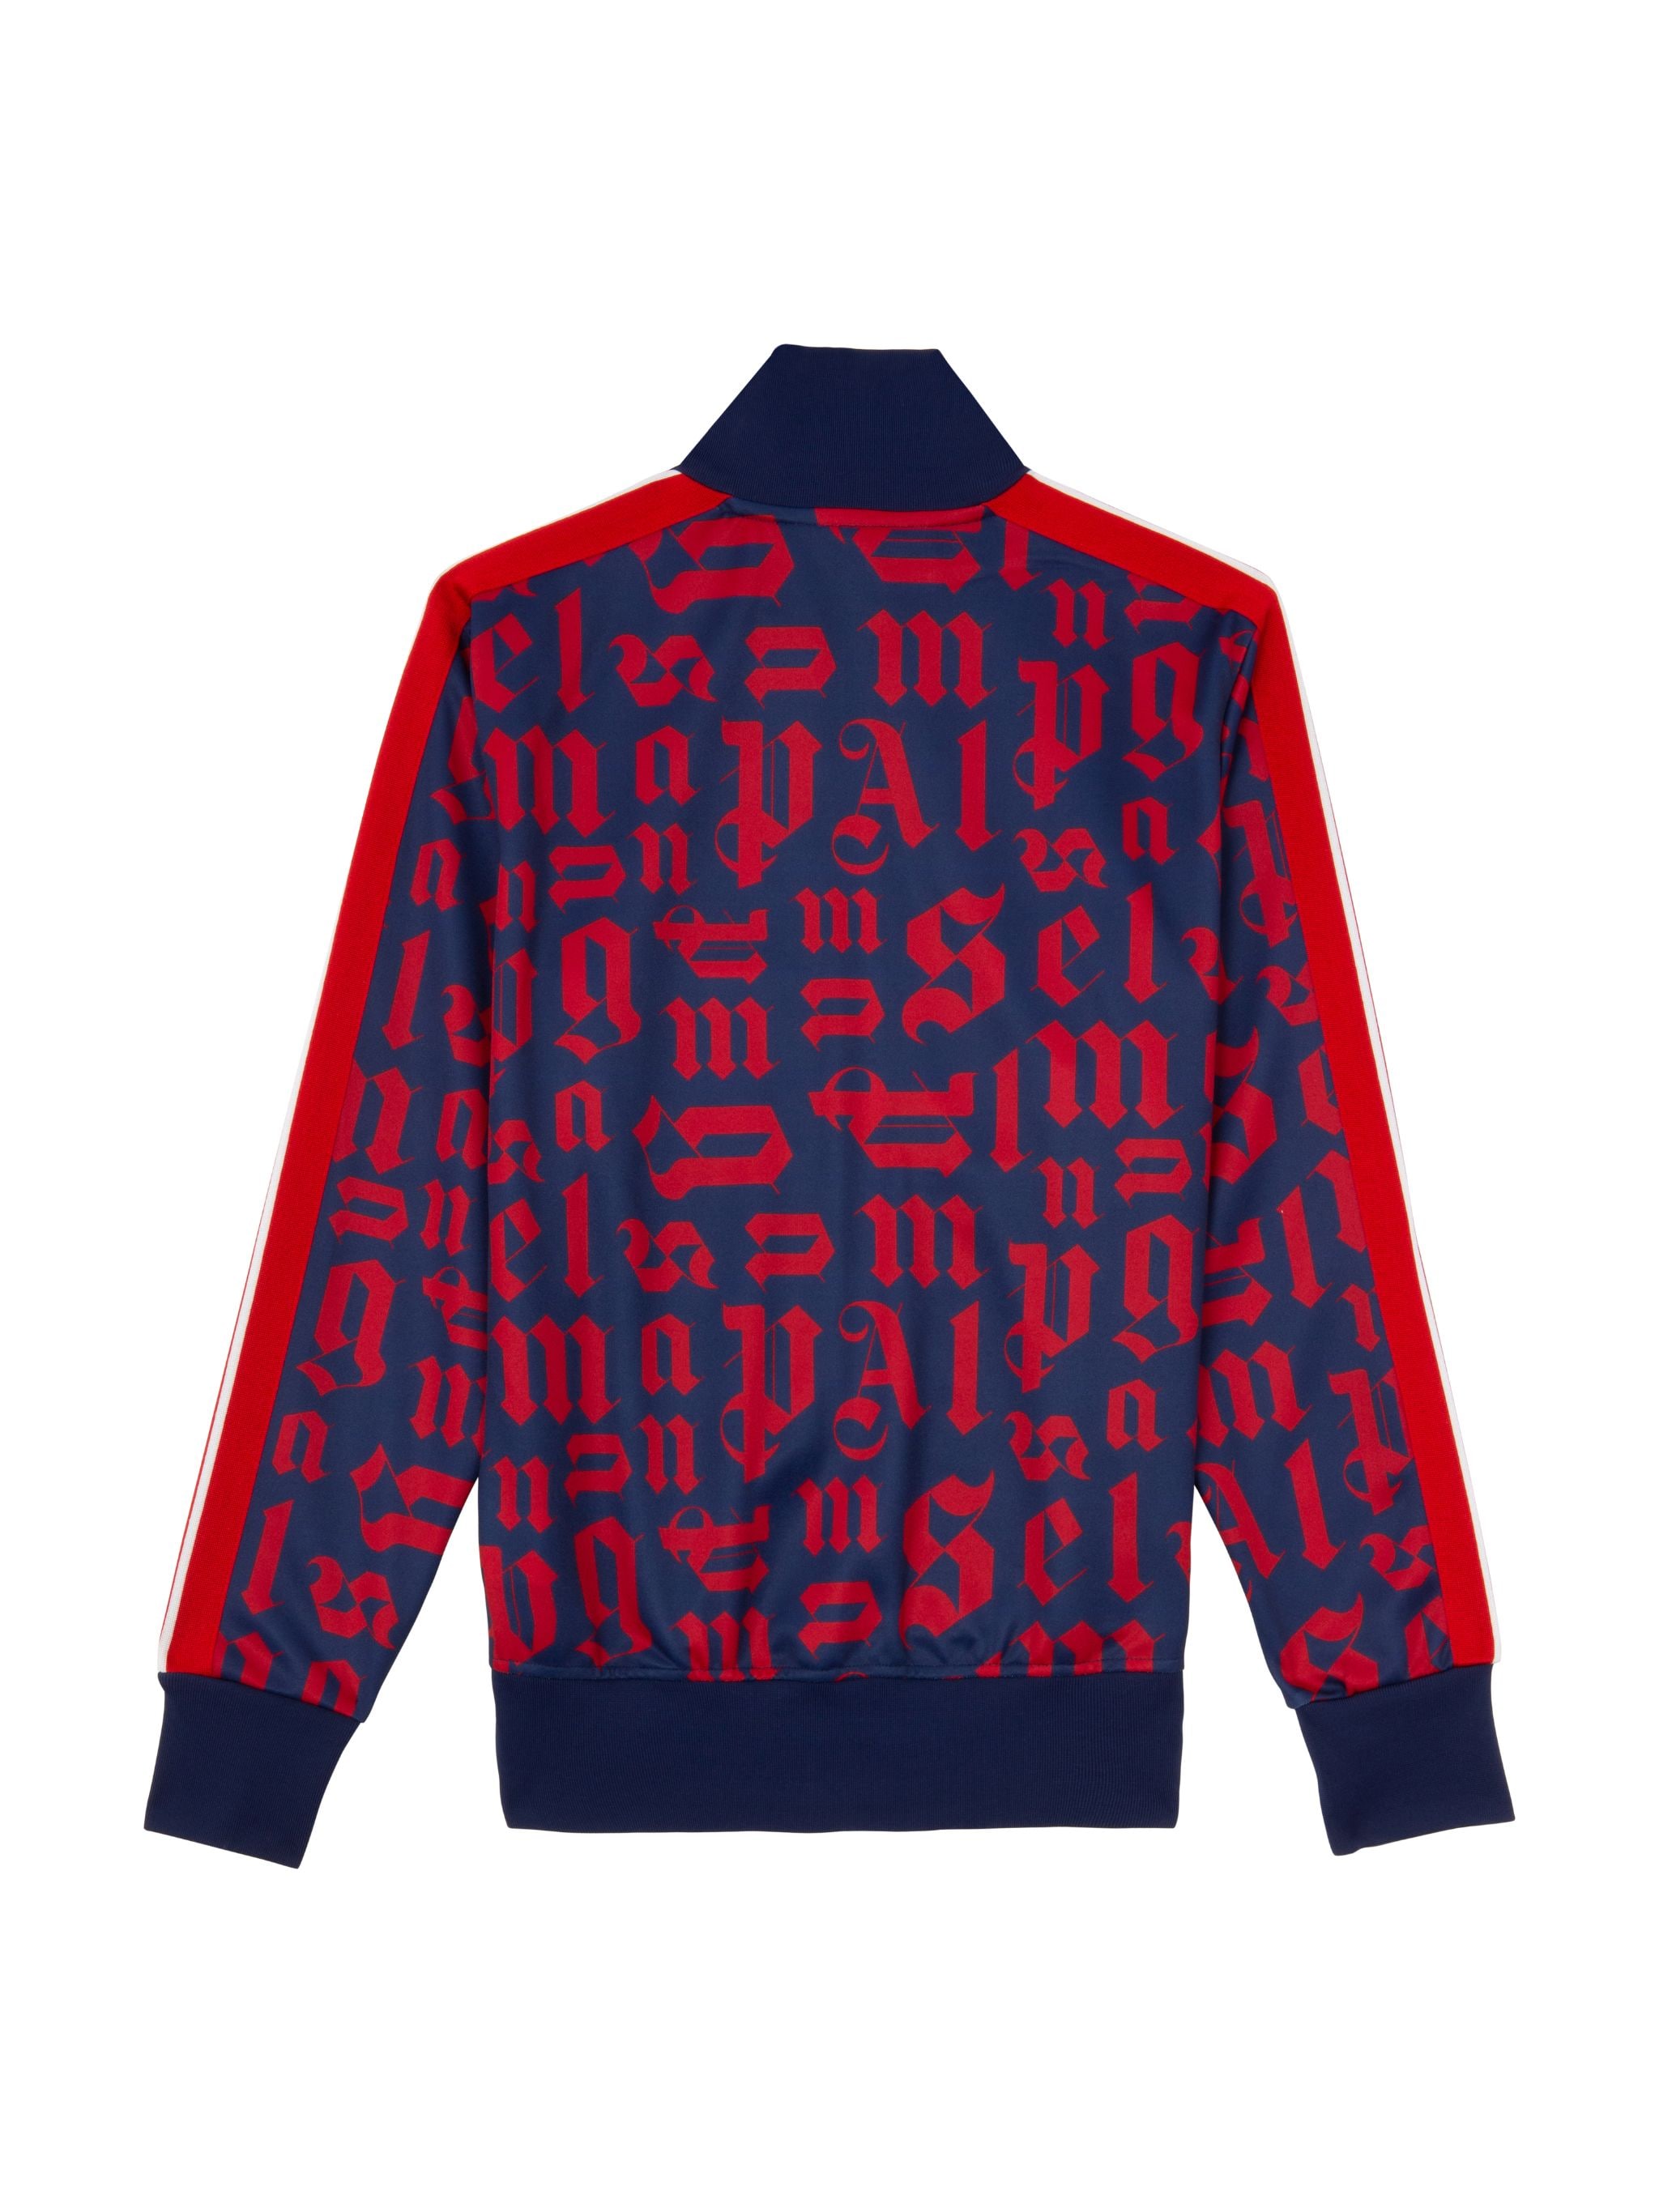 Palm Angels Blue & Red Monogram Track Jacket for Sale in